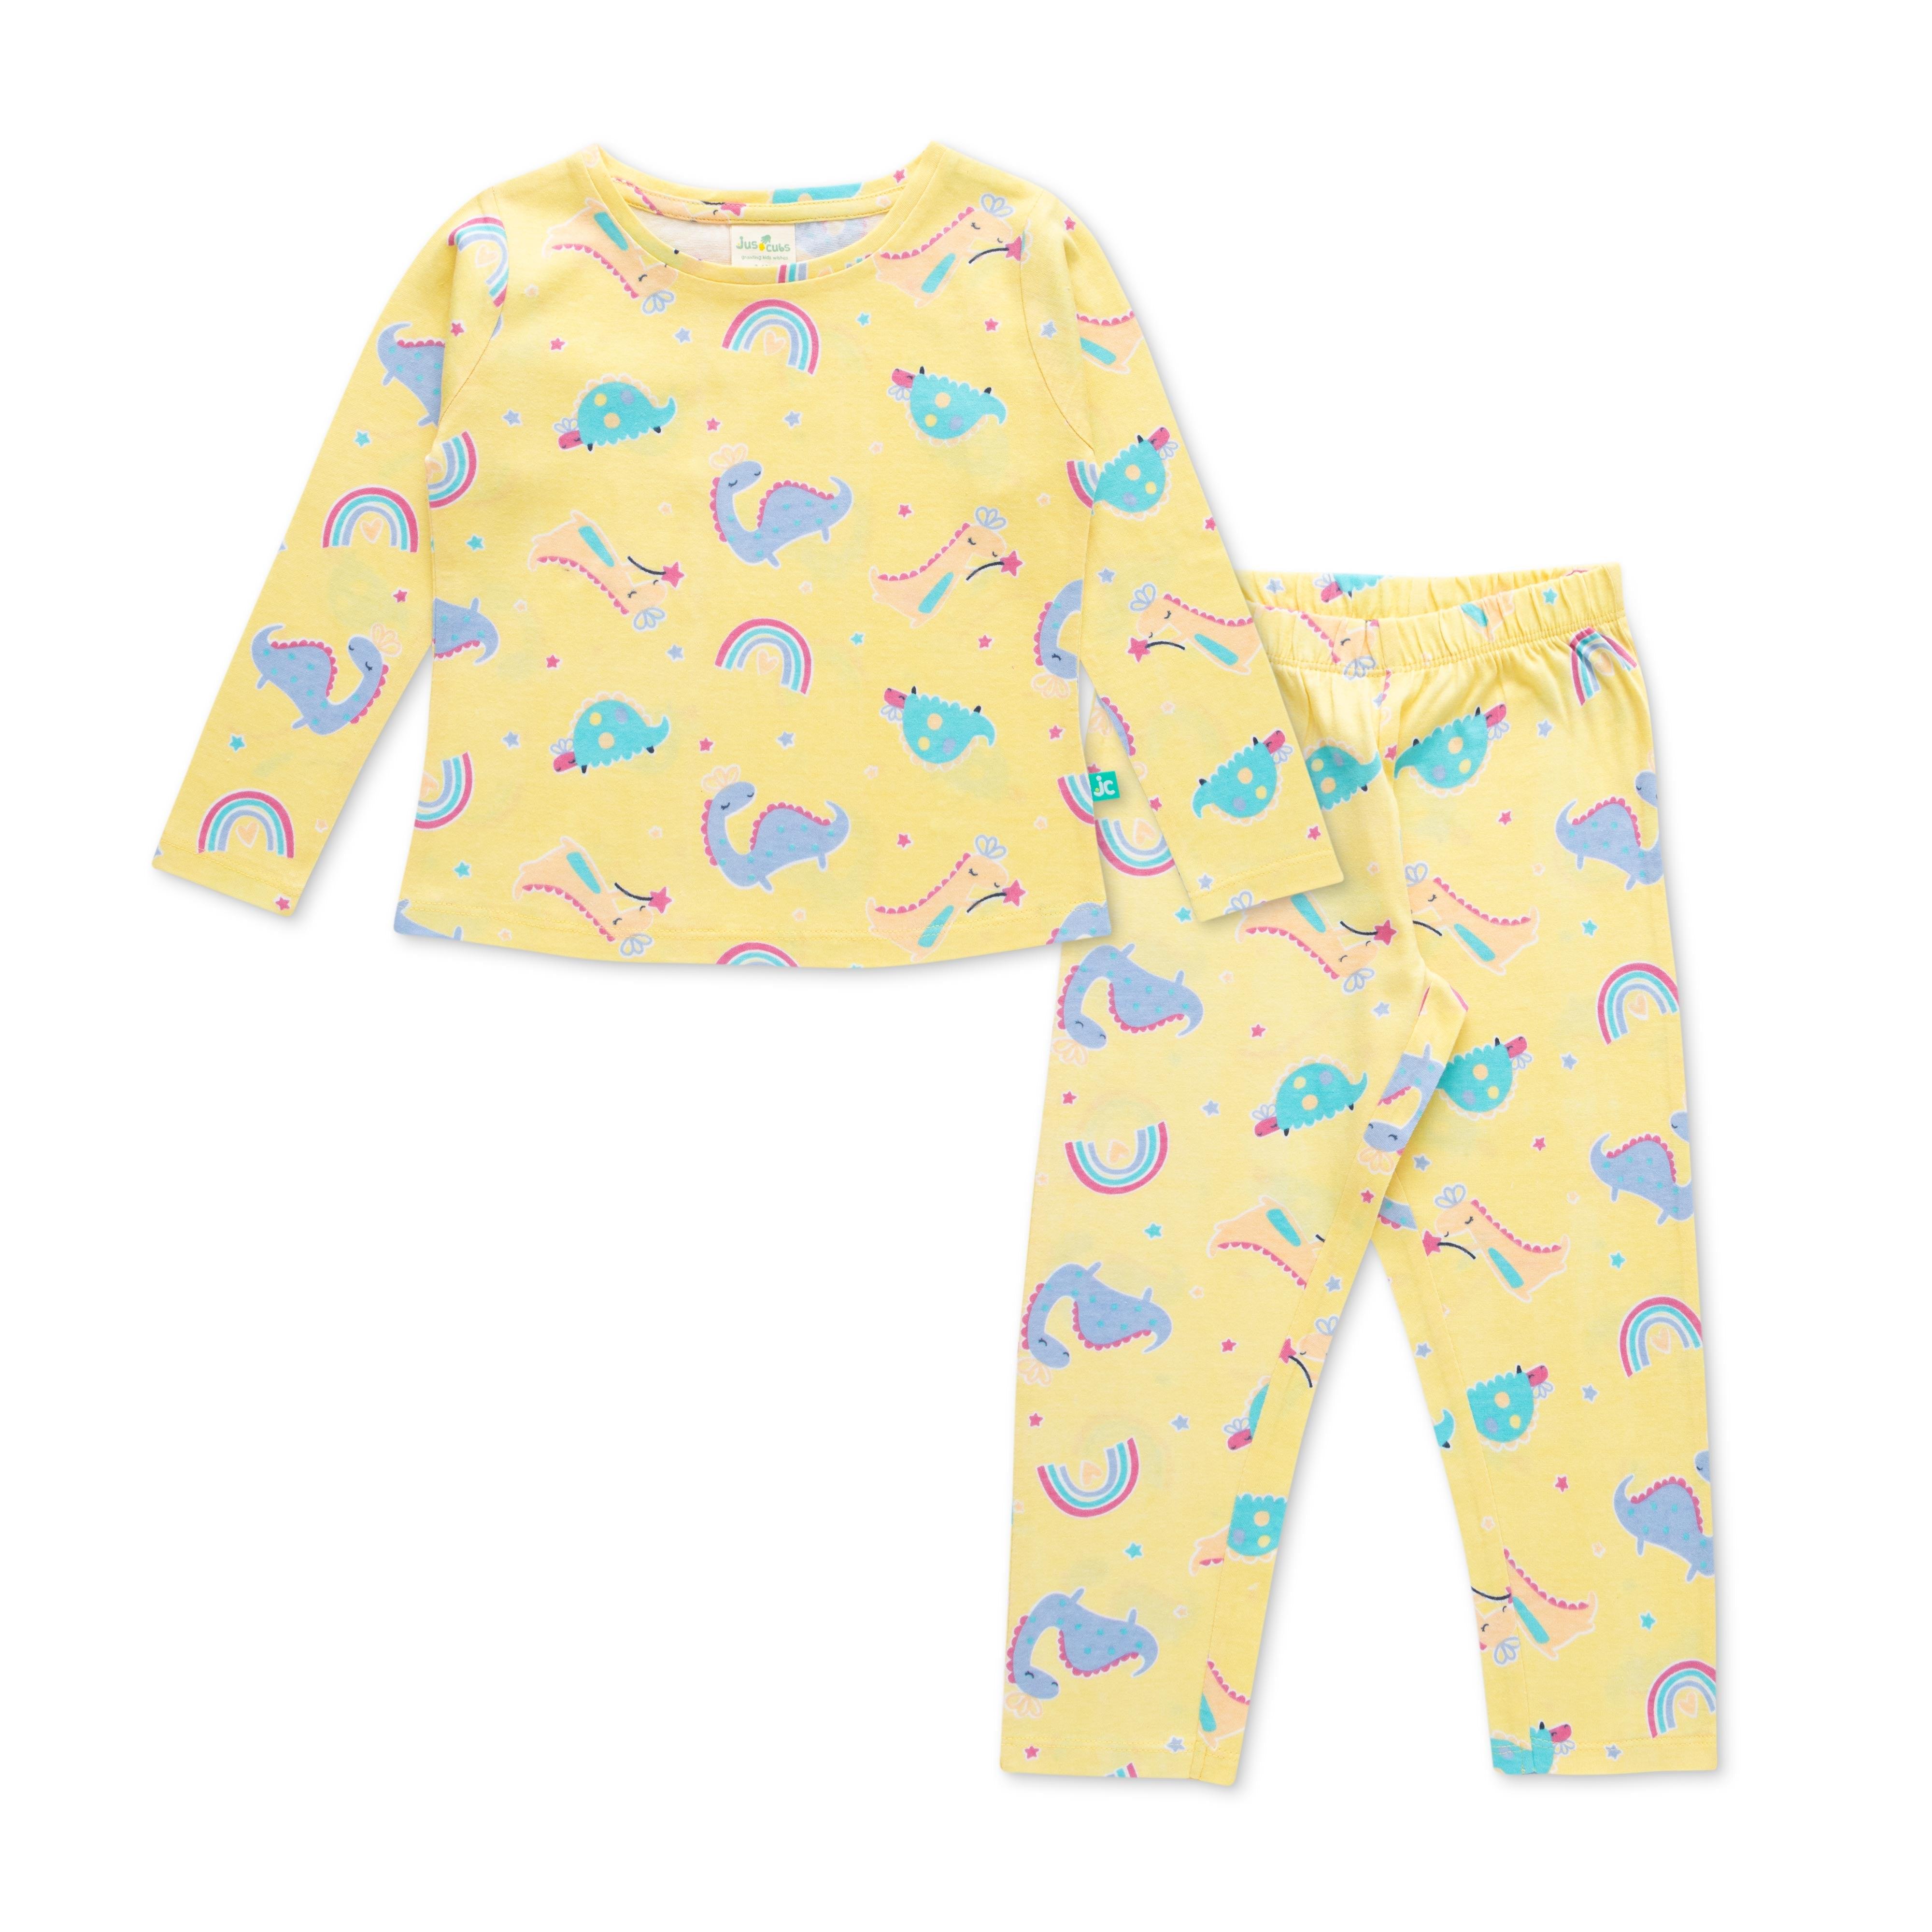 Baby Girls Yellow & Blue Printed Night suit - Juscubs